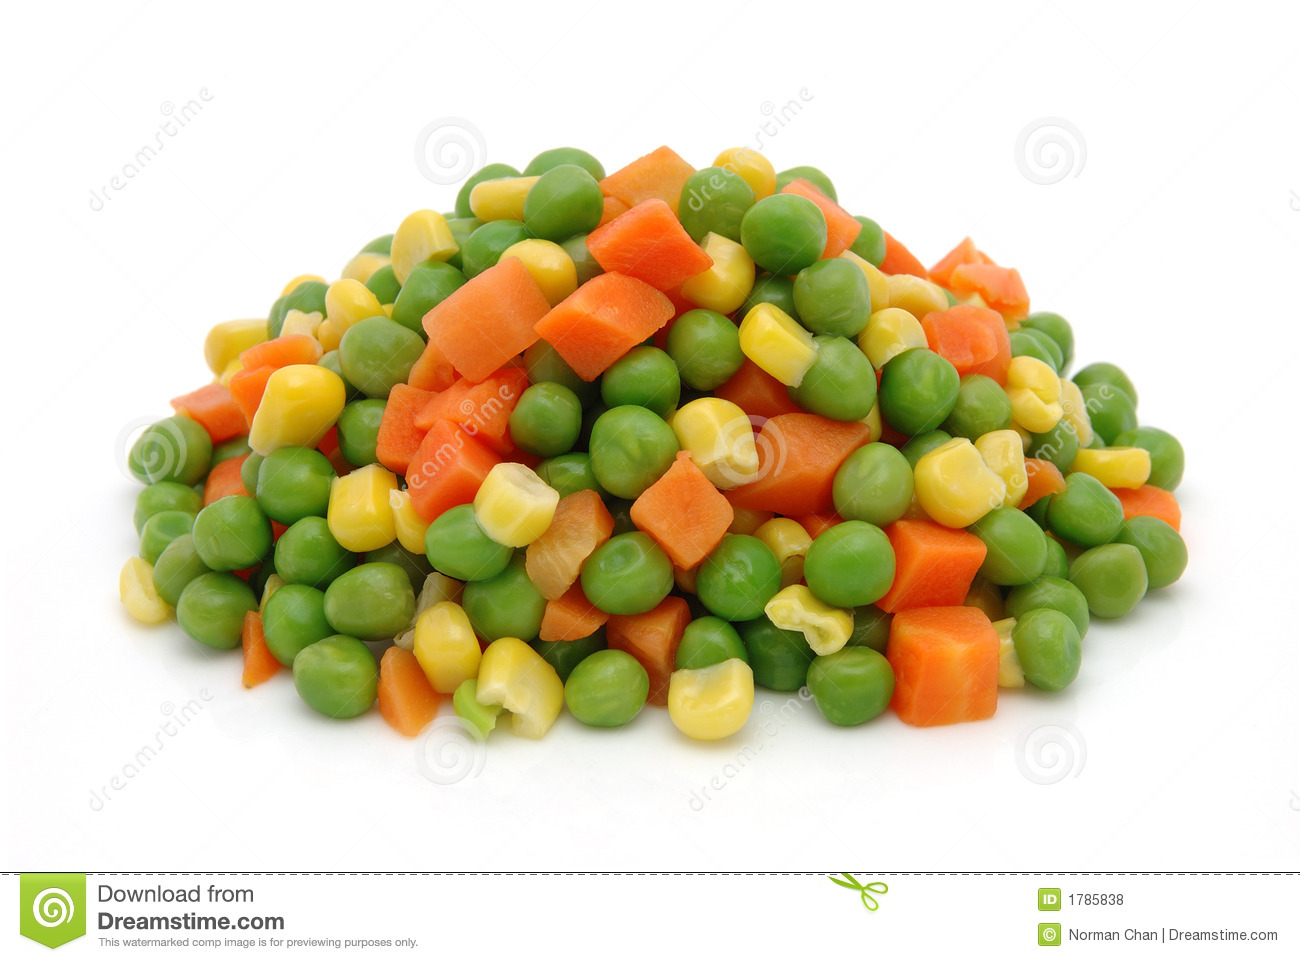 Frozen Mixed Vegetables Royalty Free Stock Photos   Image  1785838